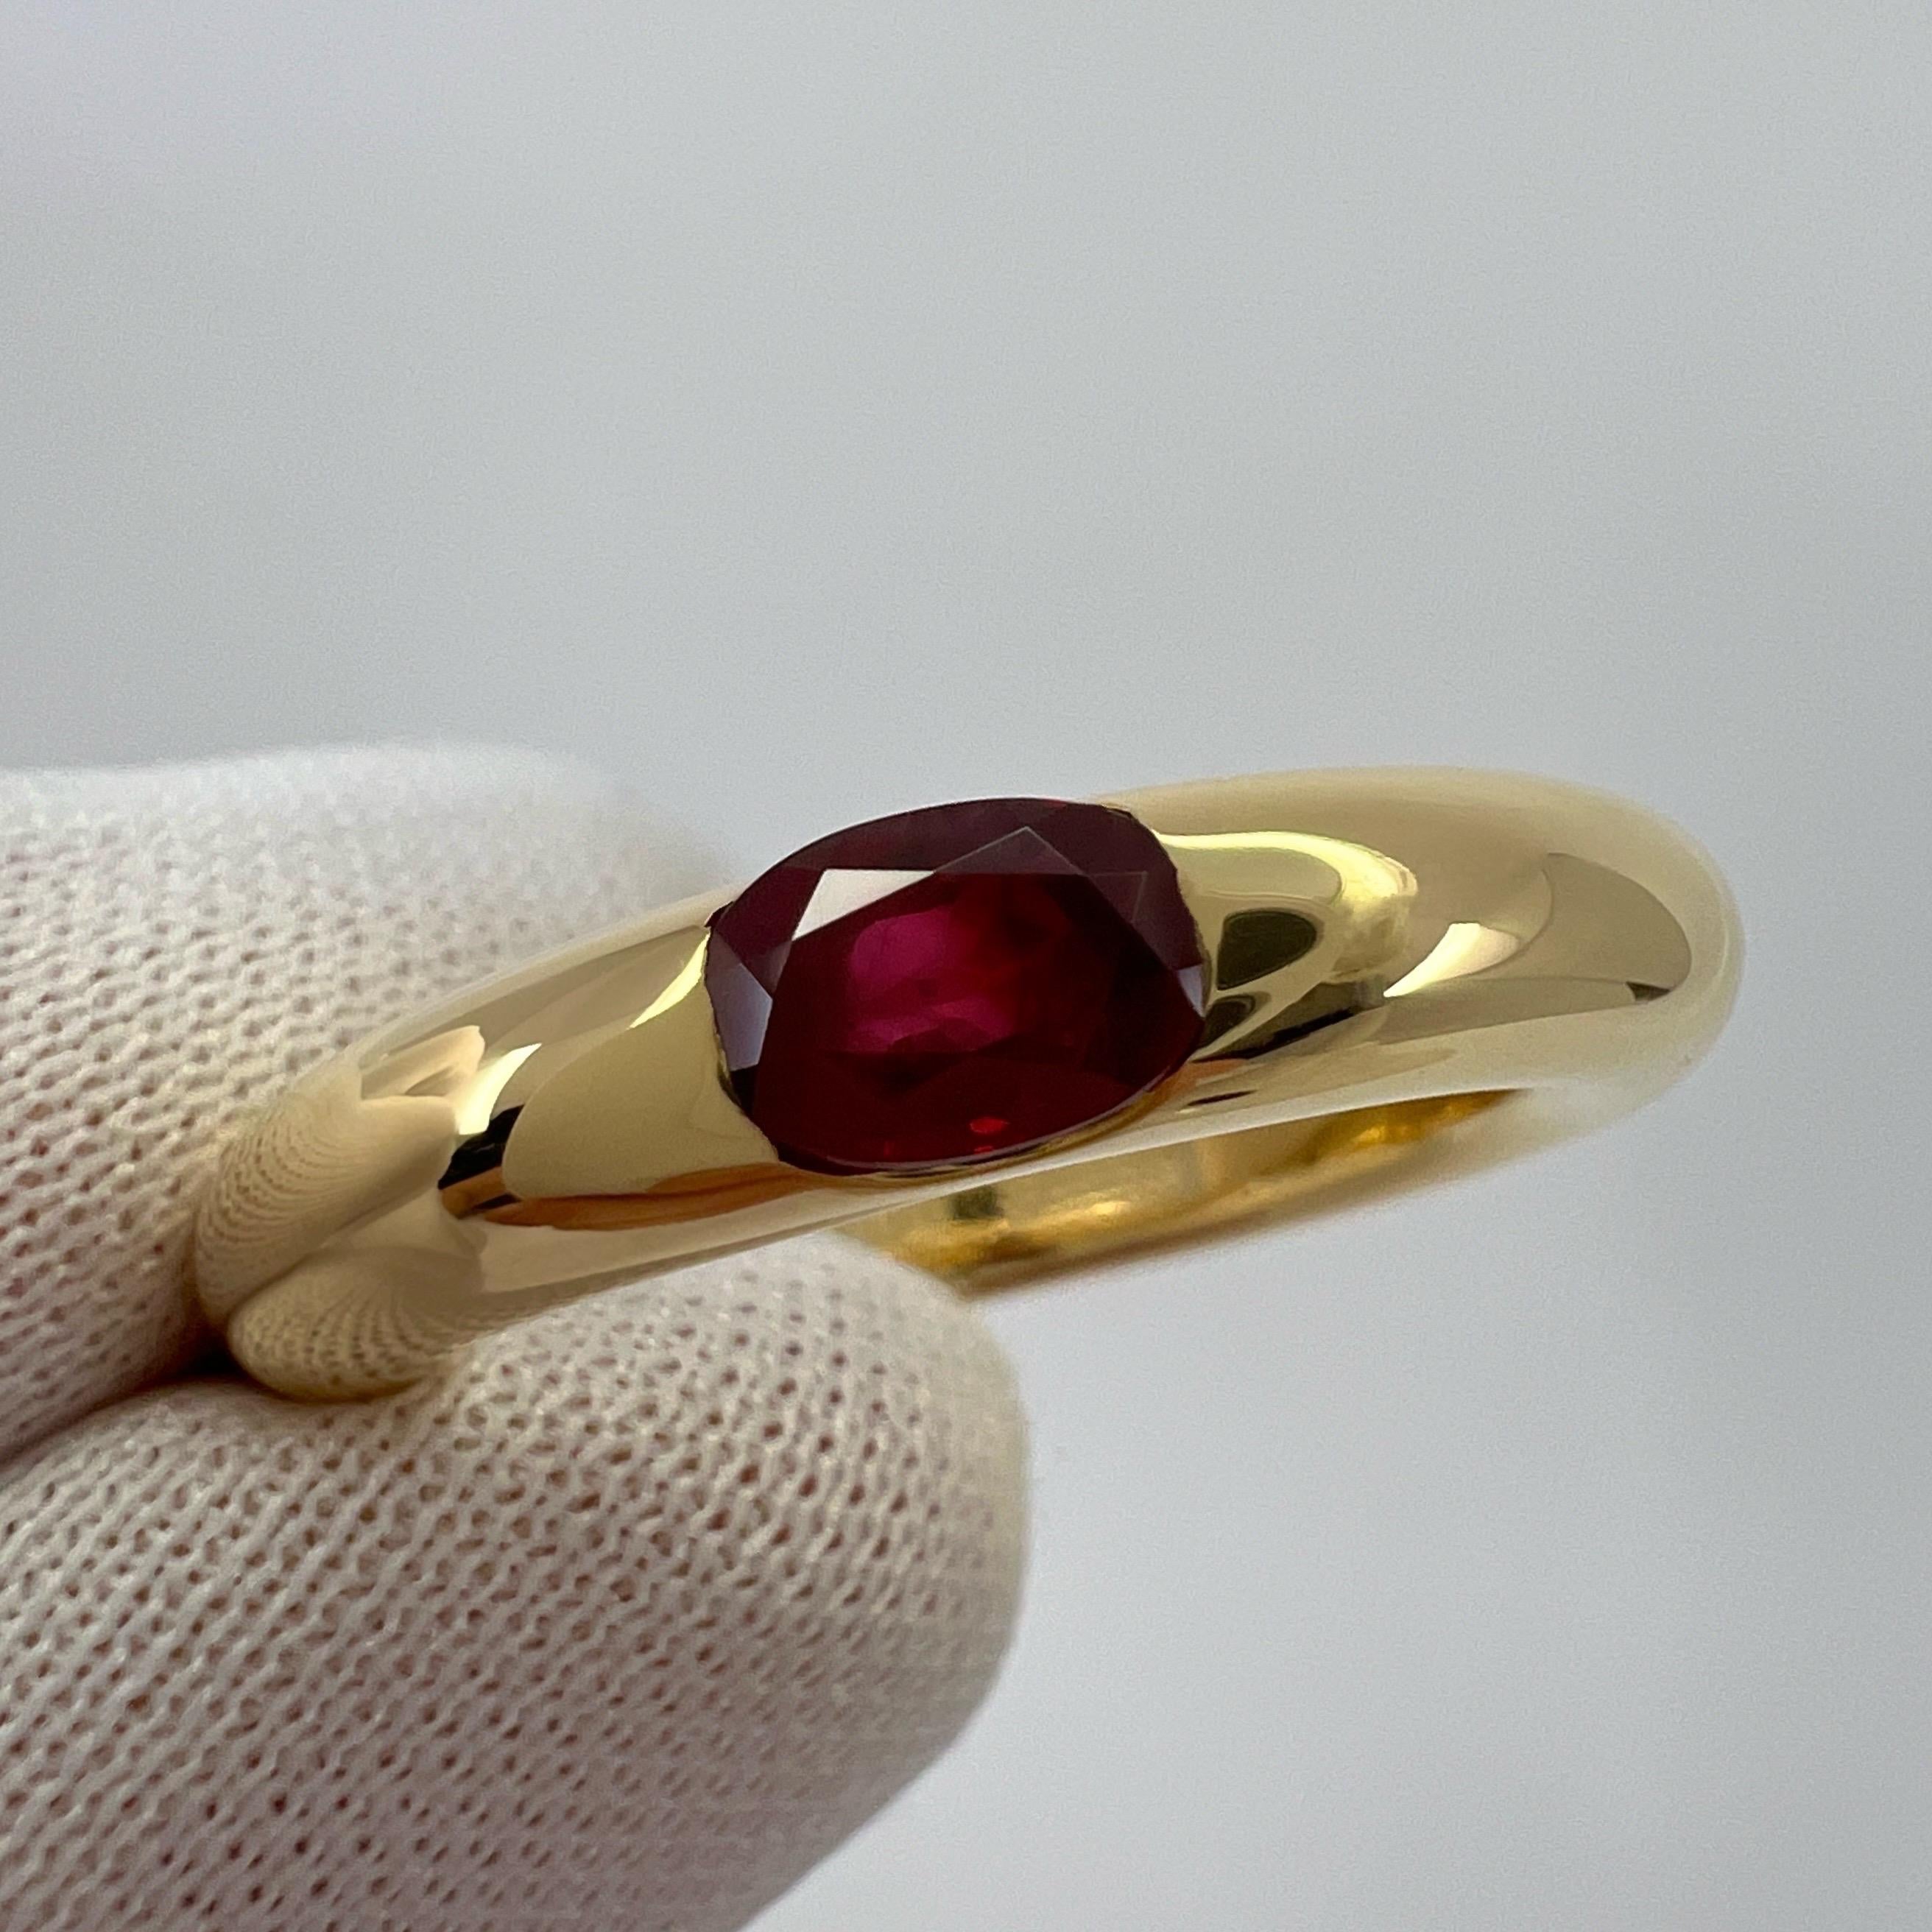 Vintage Cartier Deep Red Ruby Ellipse 18k Yellow Gold Oval Solitaire Ring 52 US6 7